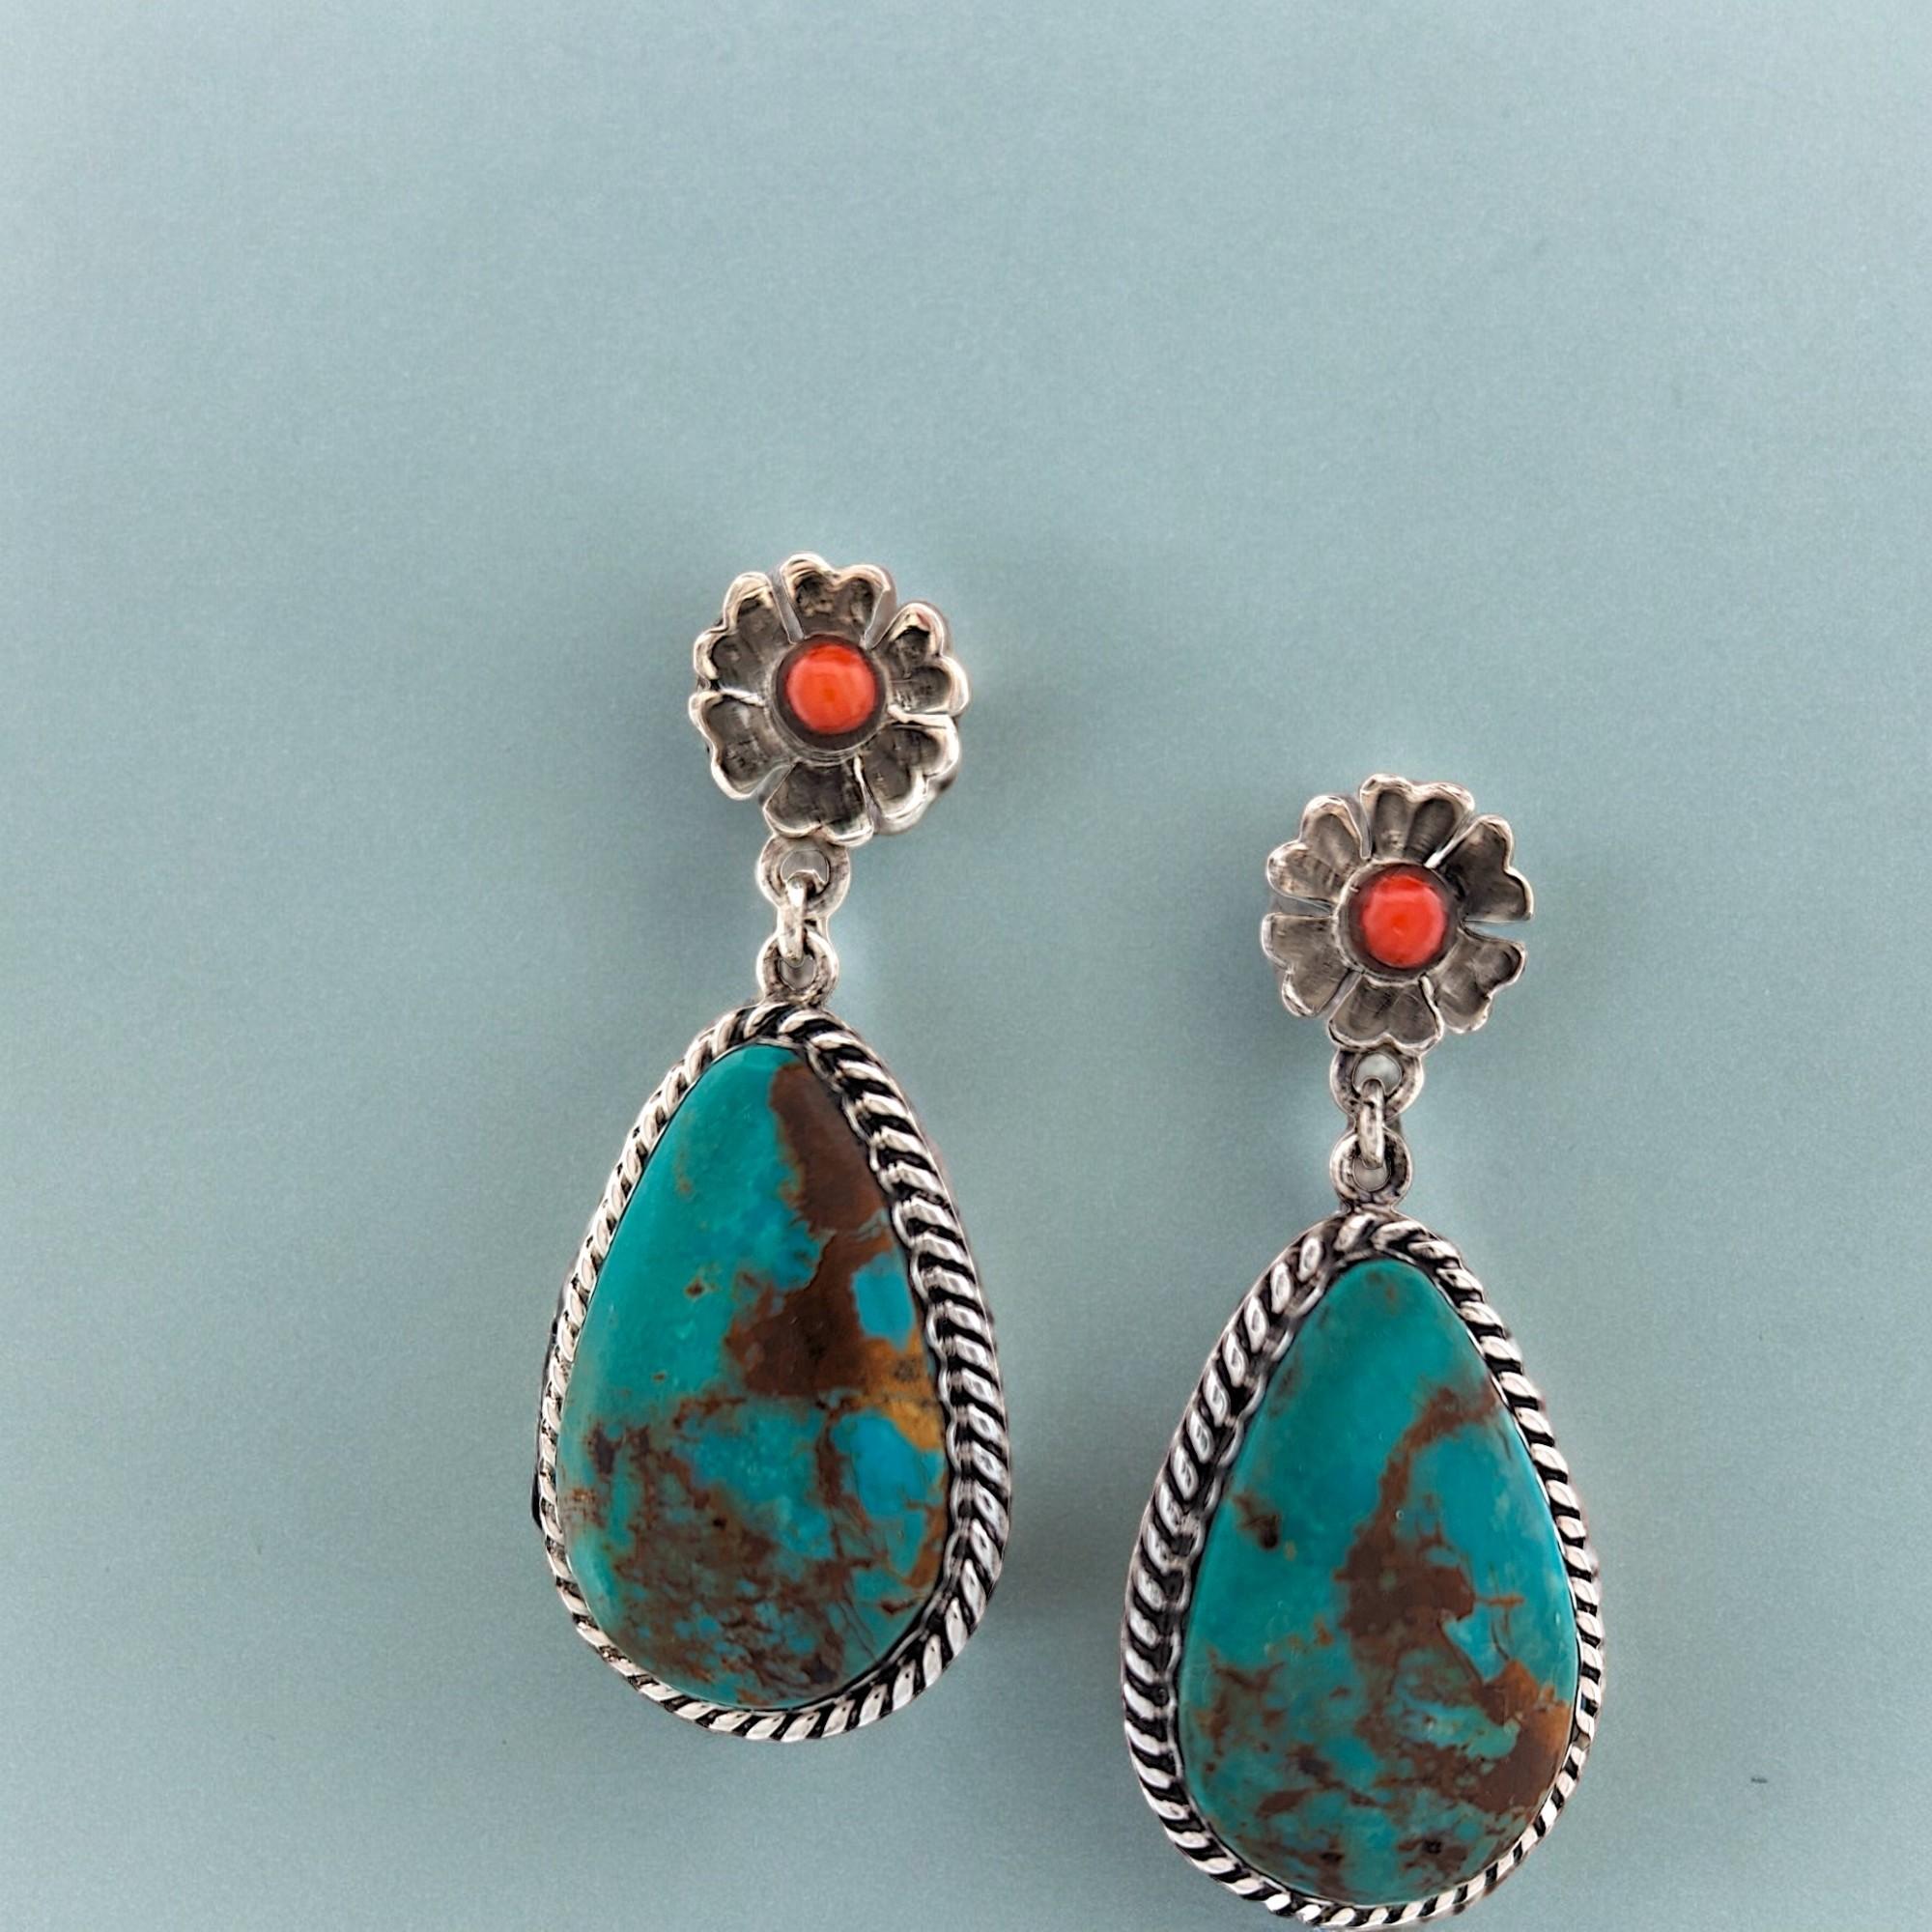 Elevate your style with these exquisite, handcrafted earrings featuring authentic Kingman Turquoise and vibrant coral accents. Sterling silver settings showcase the natural beauty of these precious materials. As a unique, handmade piece, these